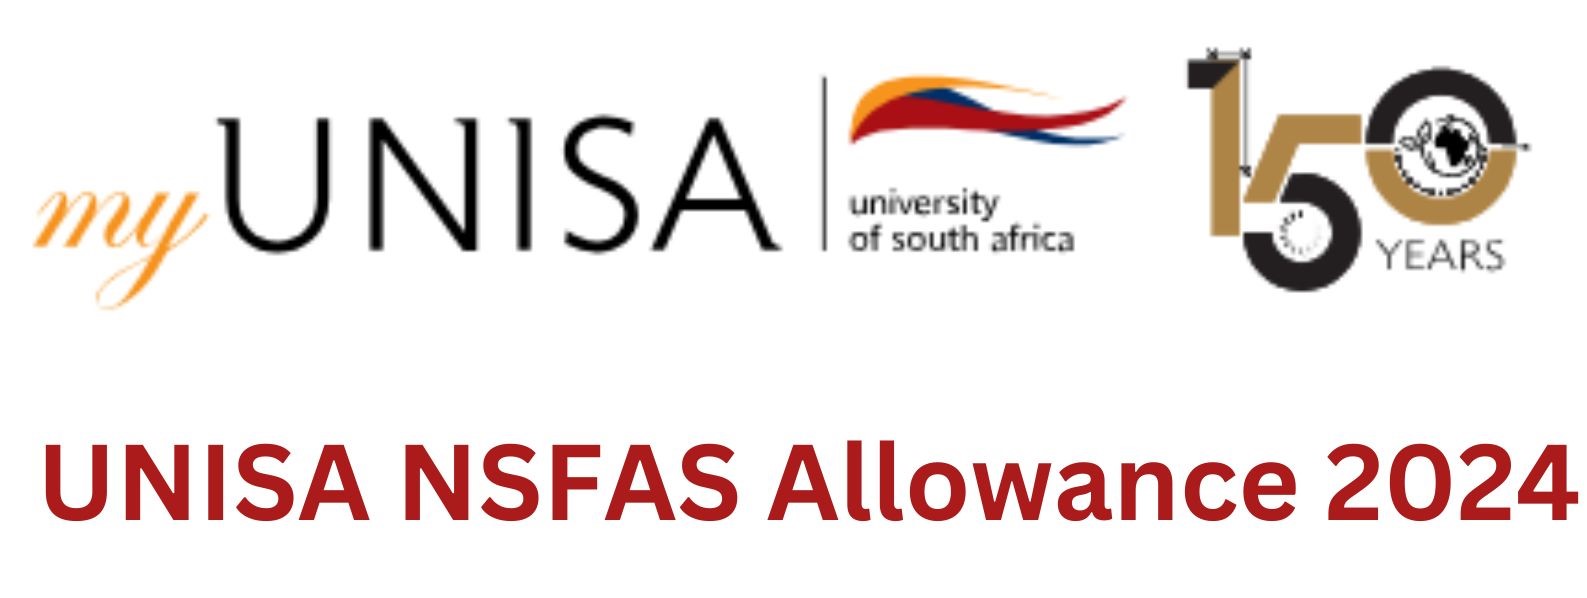 UNISA NSFAS Allowance 2024 For New And Returning Students